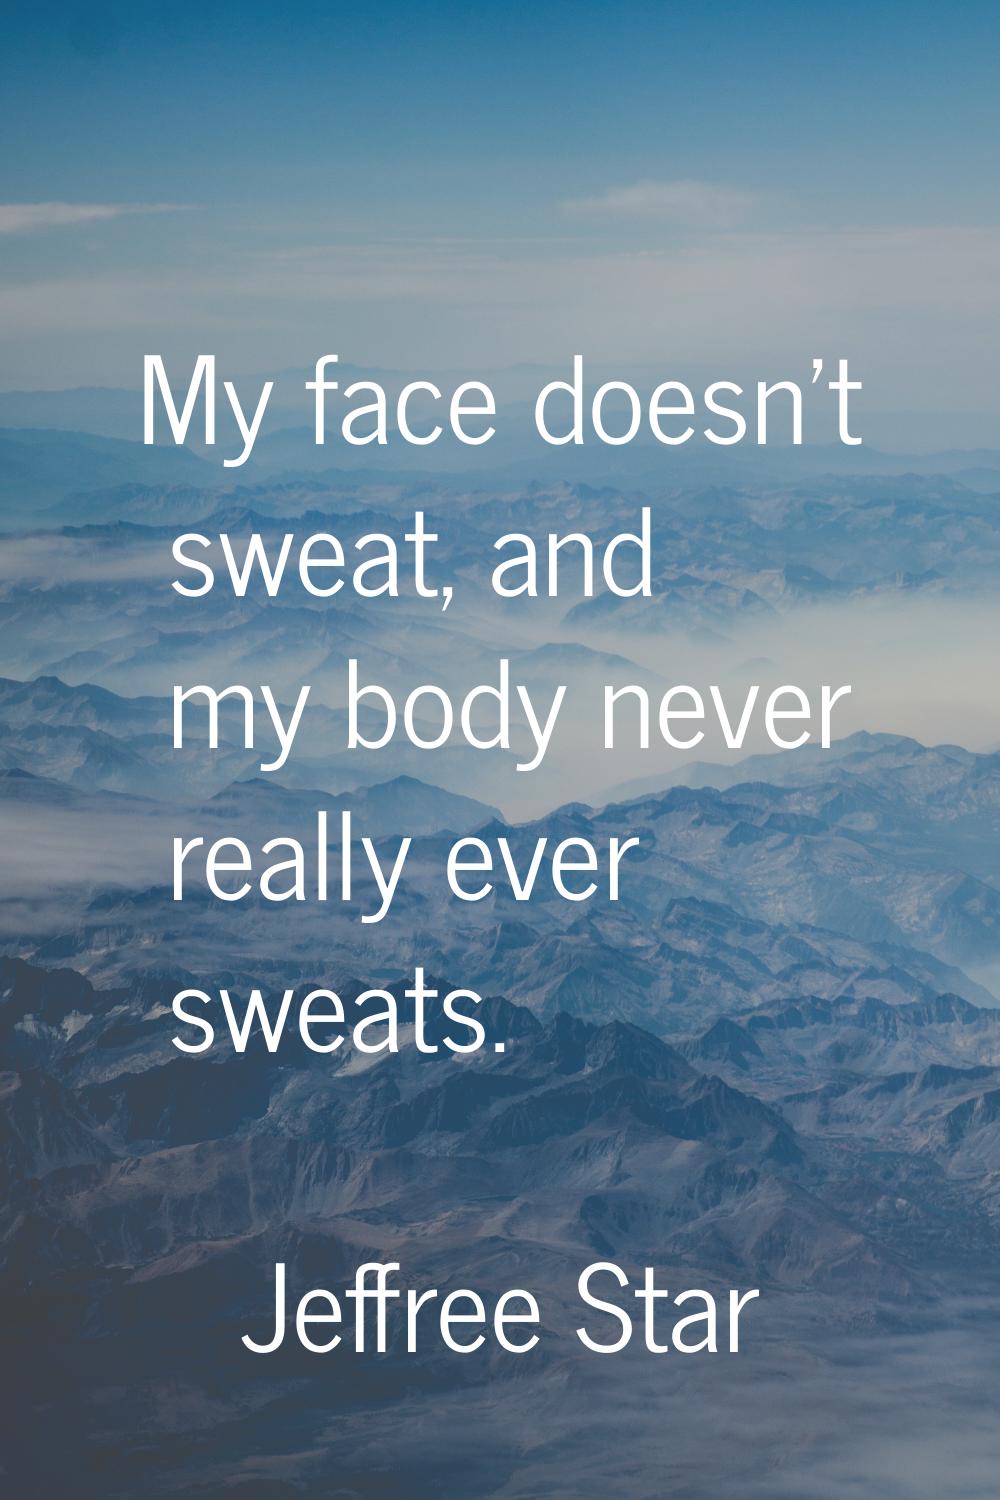 My face doesn't sweat, and my body never really ever sweats.